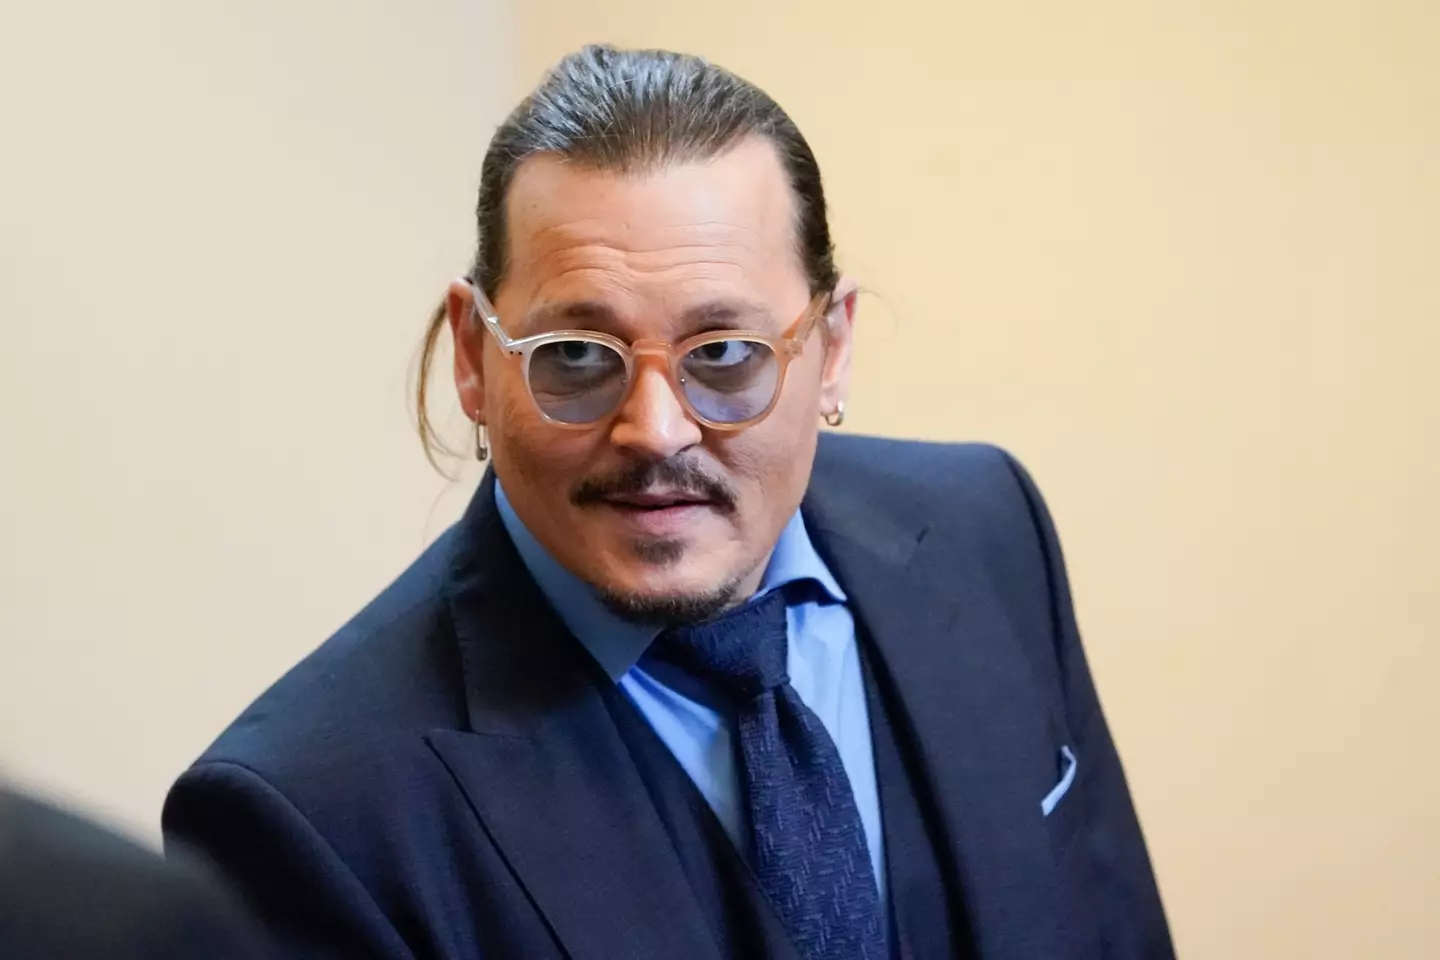 Johnny Depp appeared to be a popular Halloween choice this year.